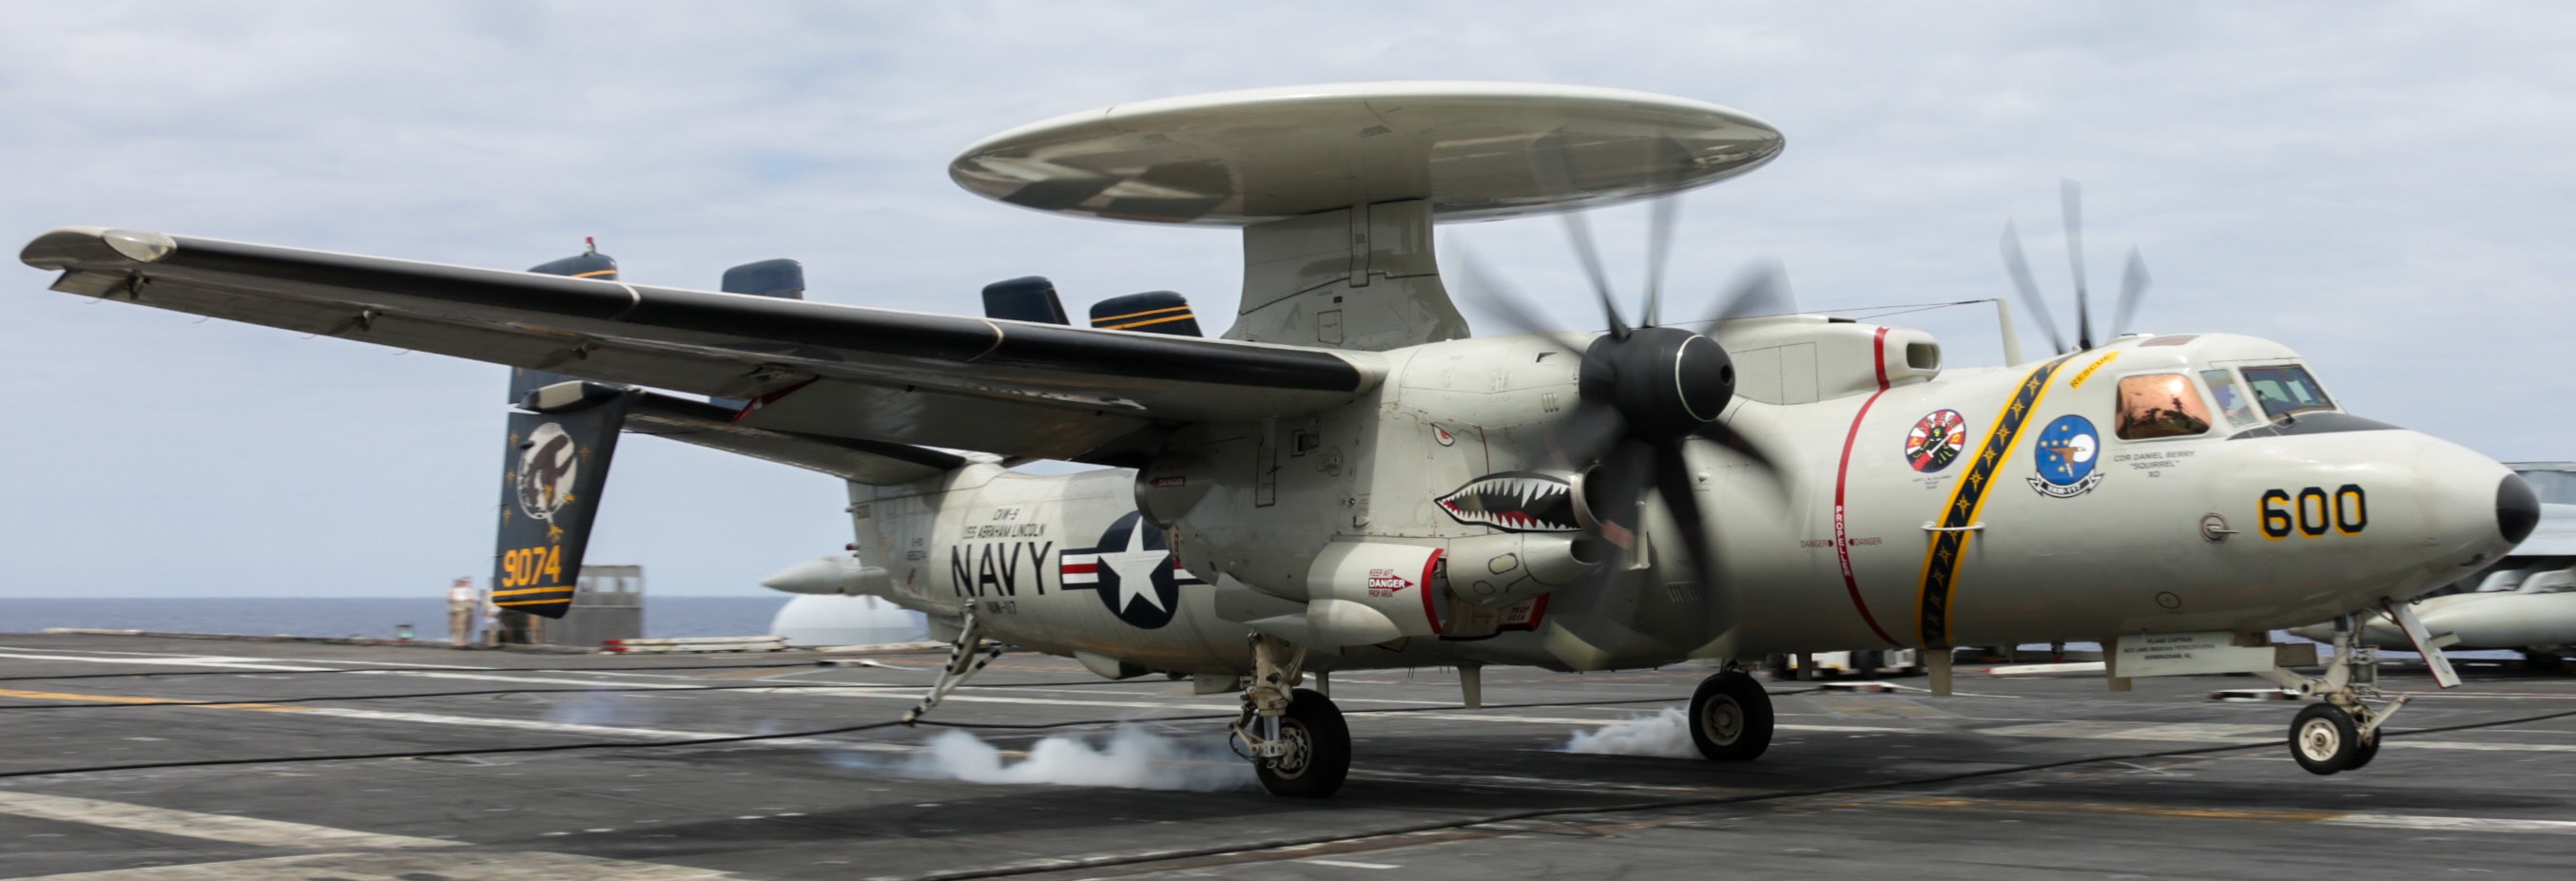 vaw-117 wallbangers airborne command and control squadron navy e-2d hawkeye cvw-9 uss abraham lincoln cvn-72 29